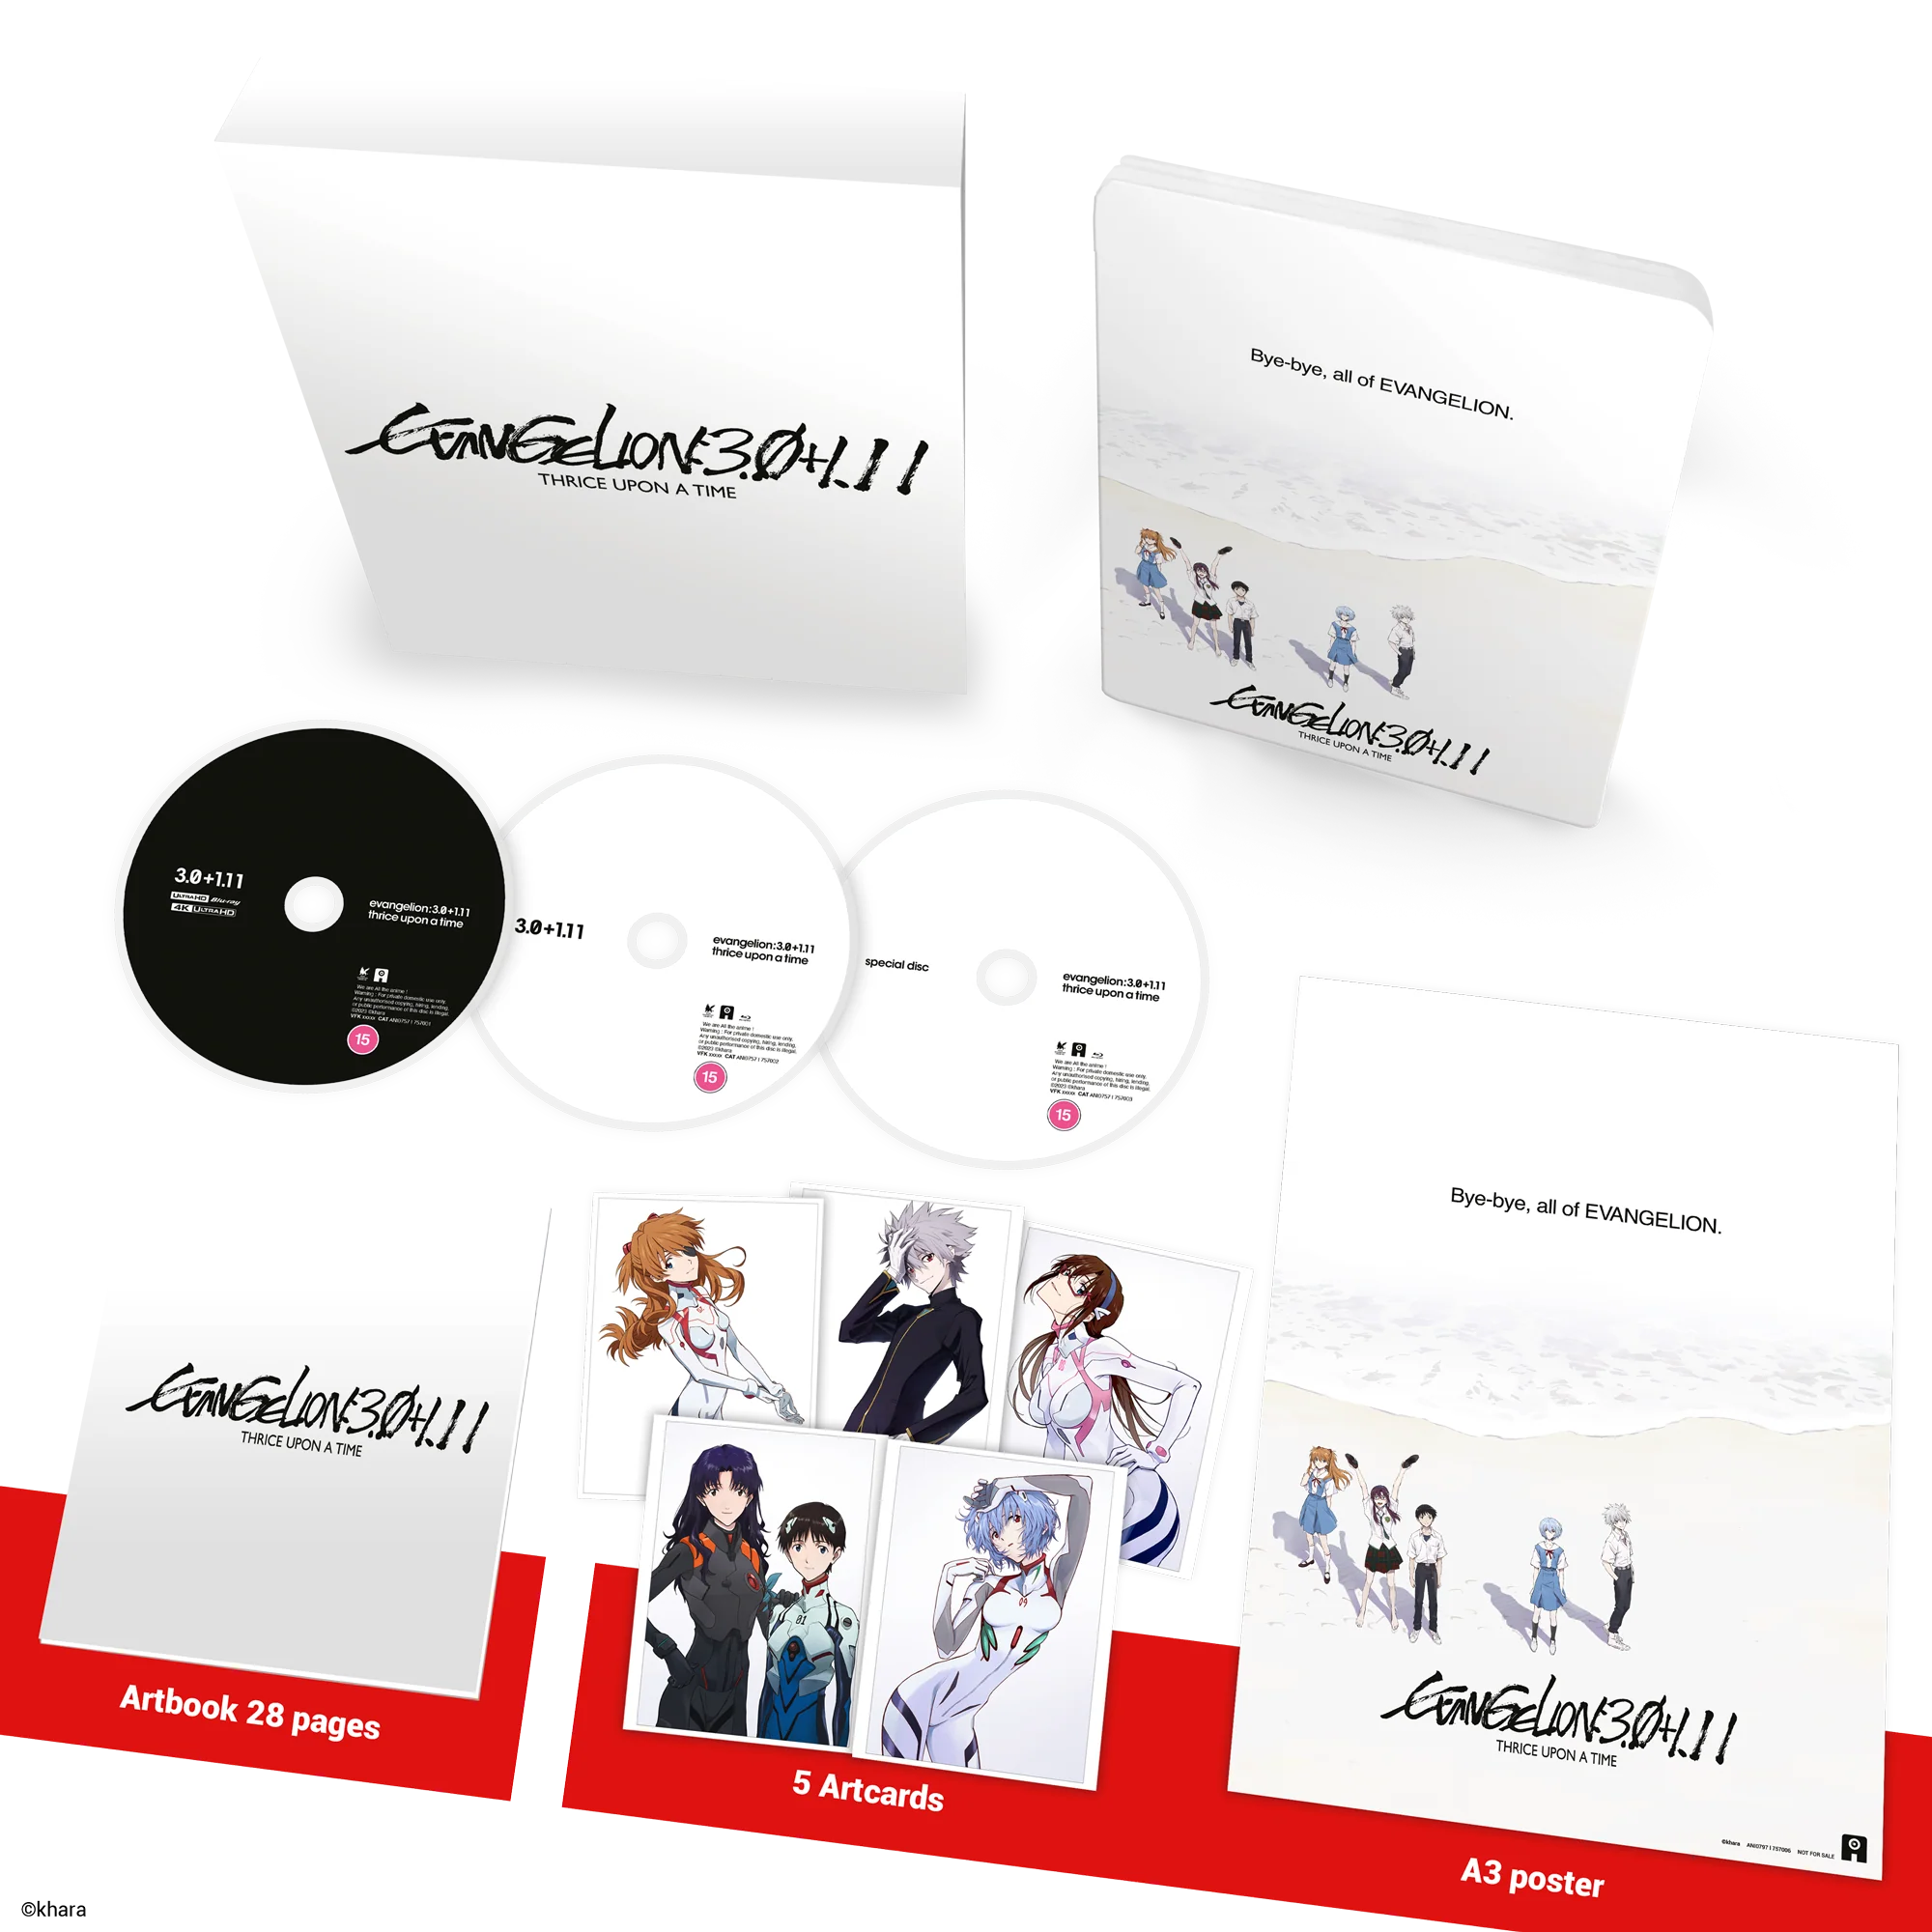 Uk Evangelion 3.331.11 Thrice Upon A Time 4K Ultra Hd Deluxe Edition 1